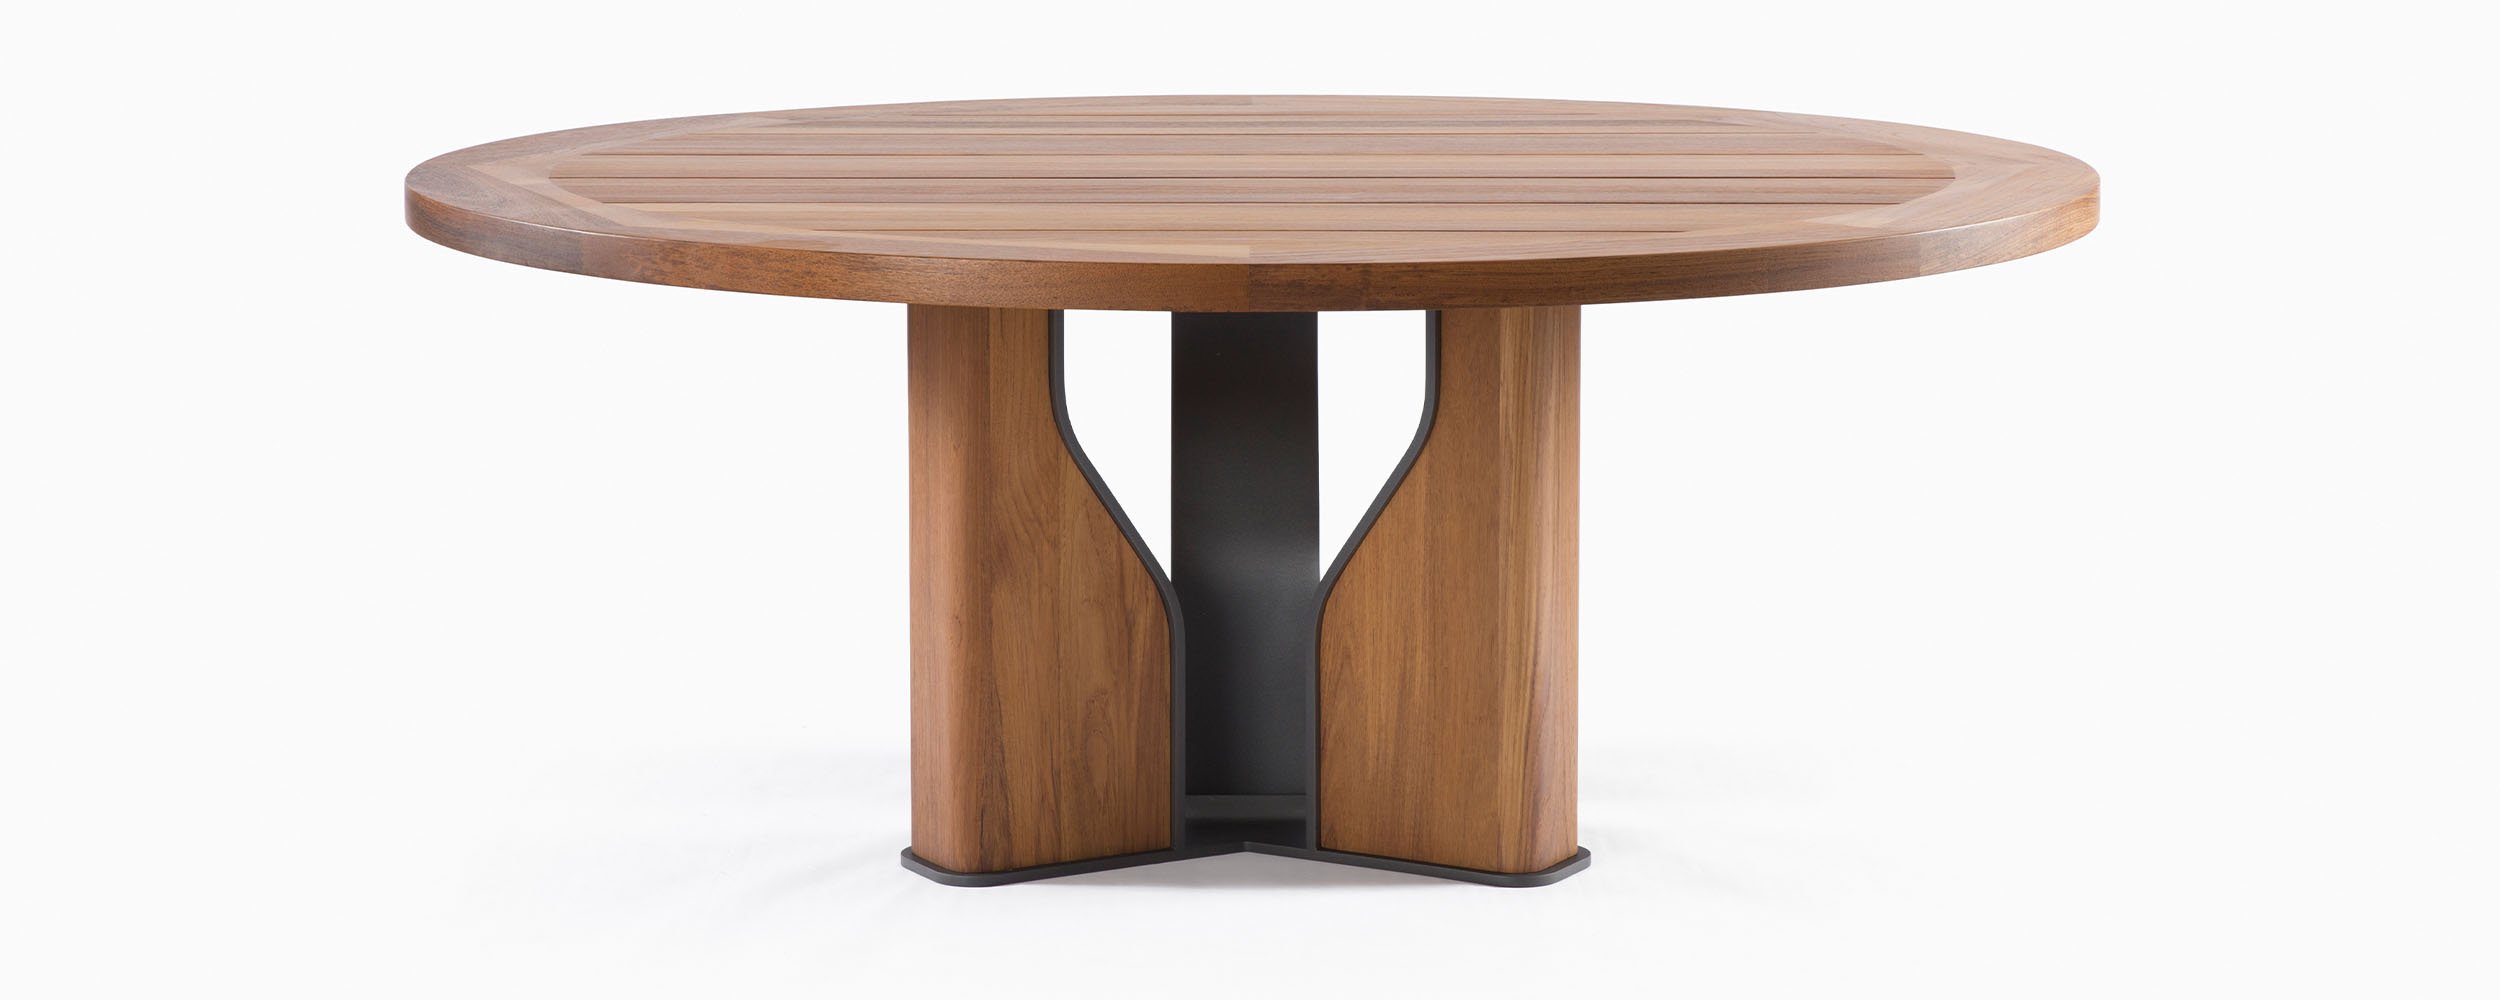 Daybreak Round Dining Table